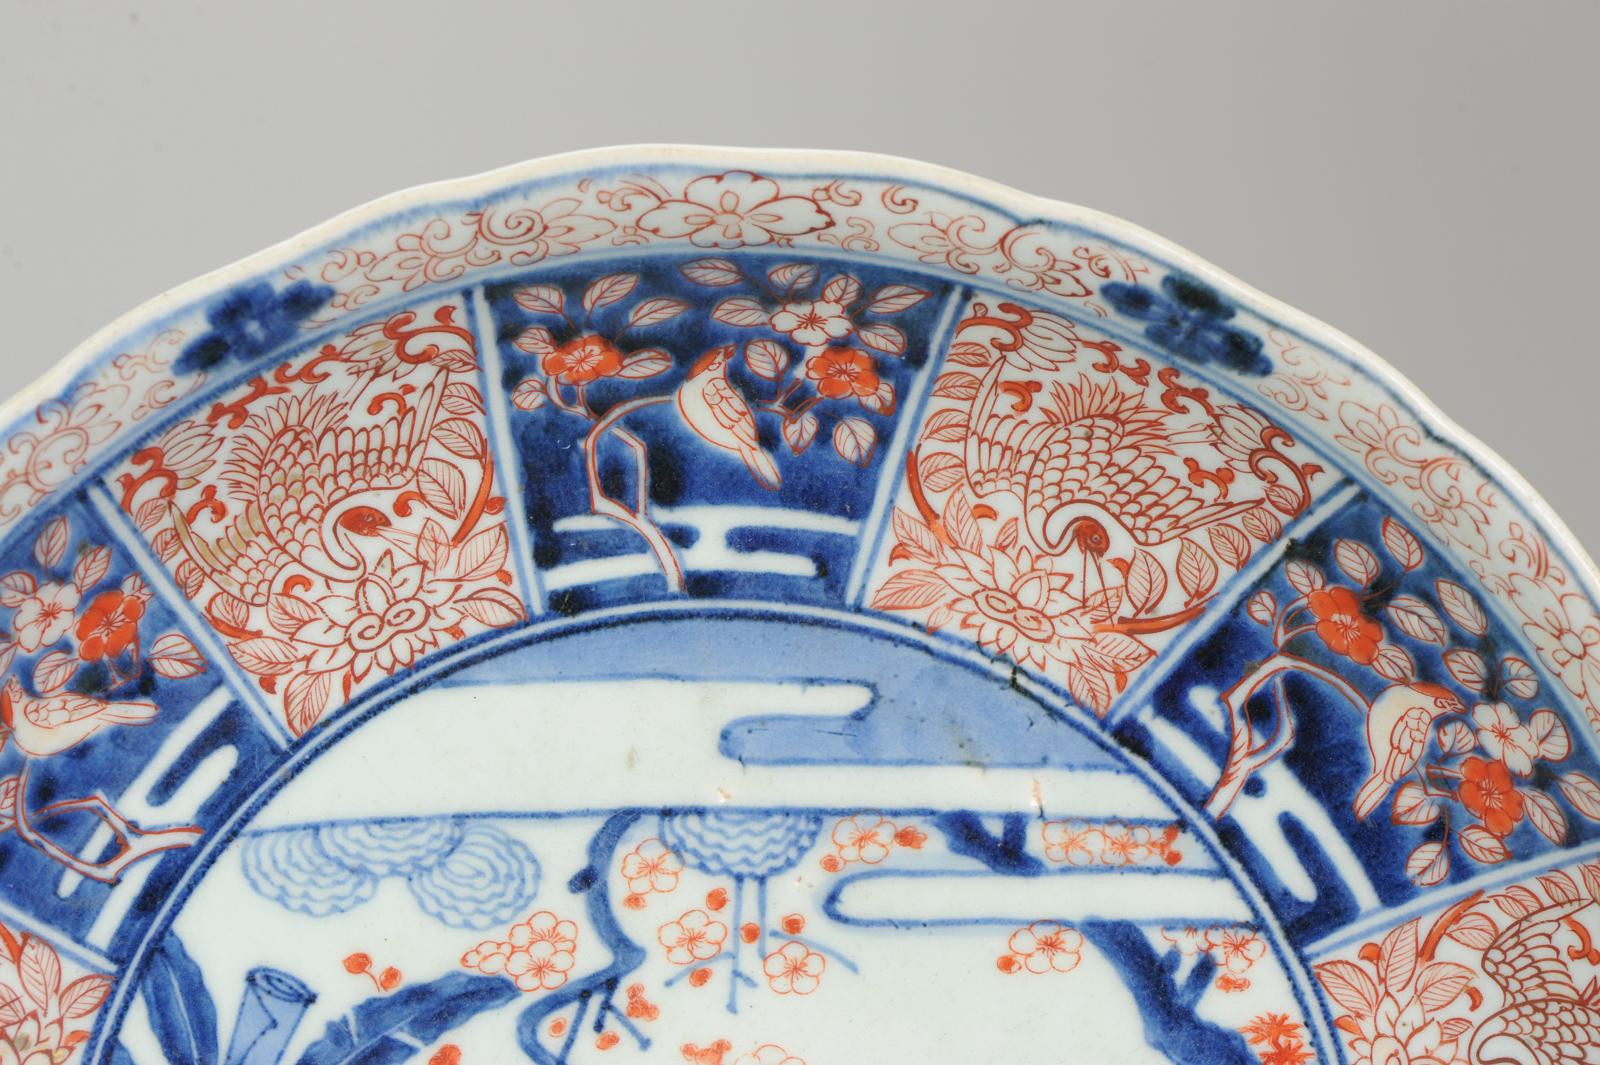 Sharing with you a large Japanese Porcelain dish (37cm) with a quite unusual Imari scene of a women in a garden scene with 4 children and dogs. On the right Shou Lao is visible on a cloud who seems to be watching over them. The cavetto has